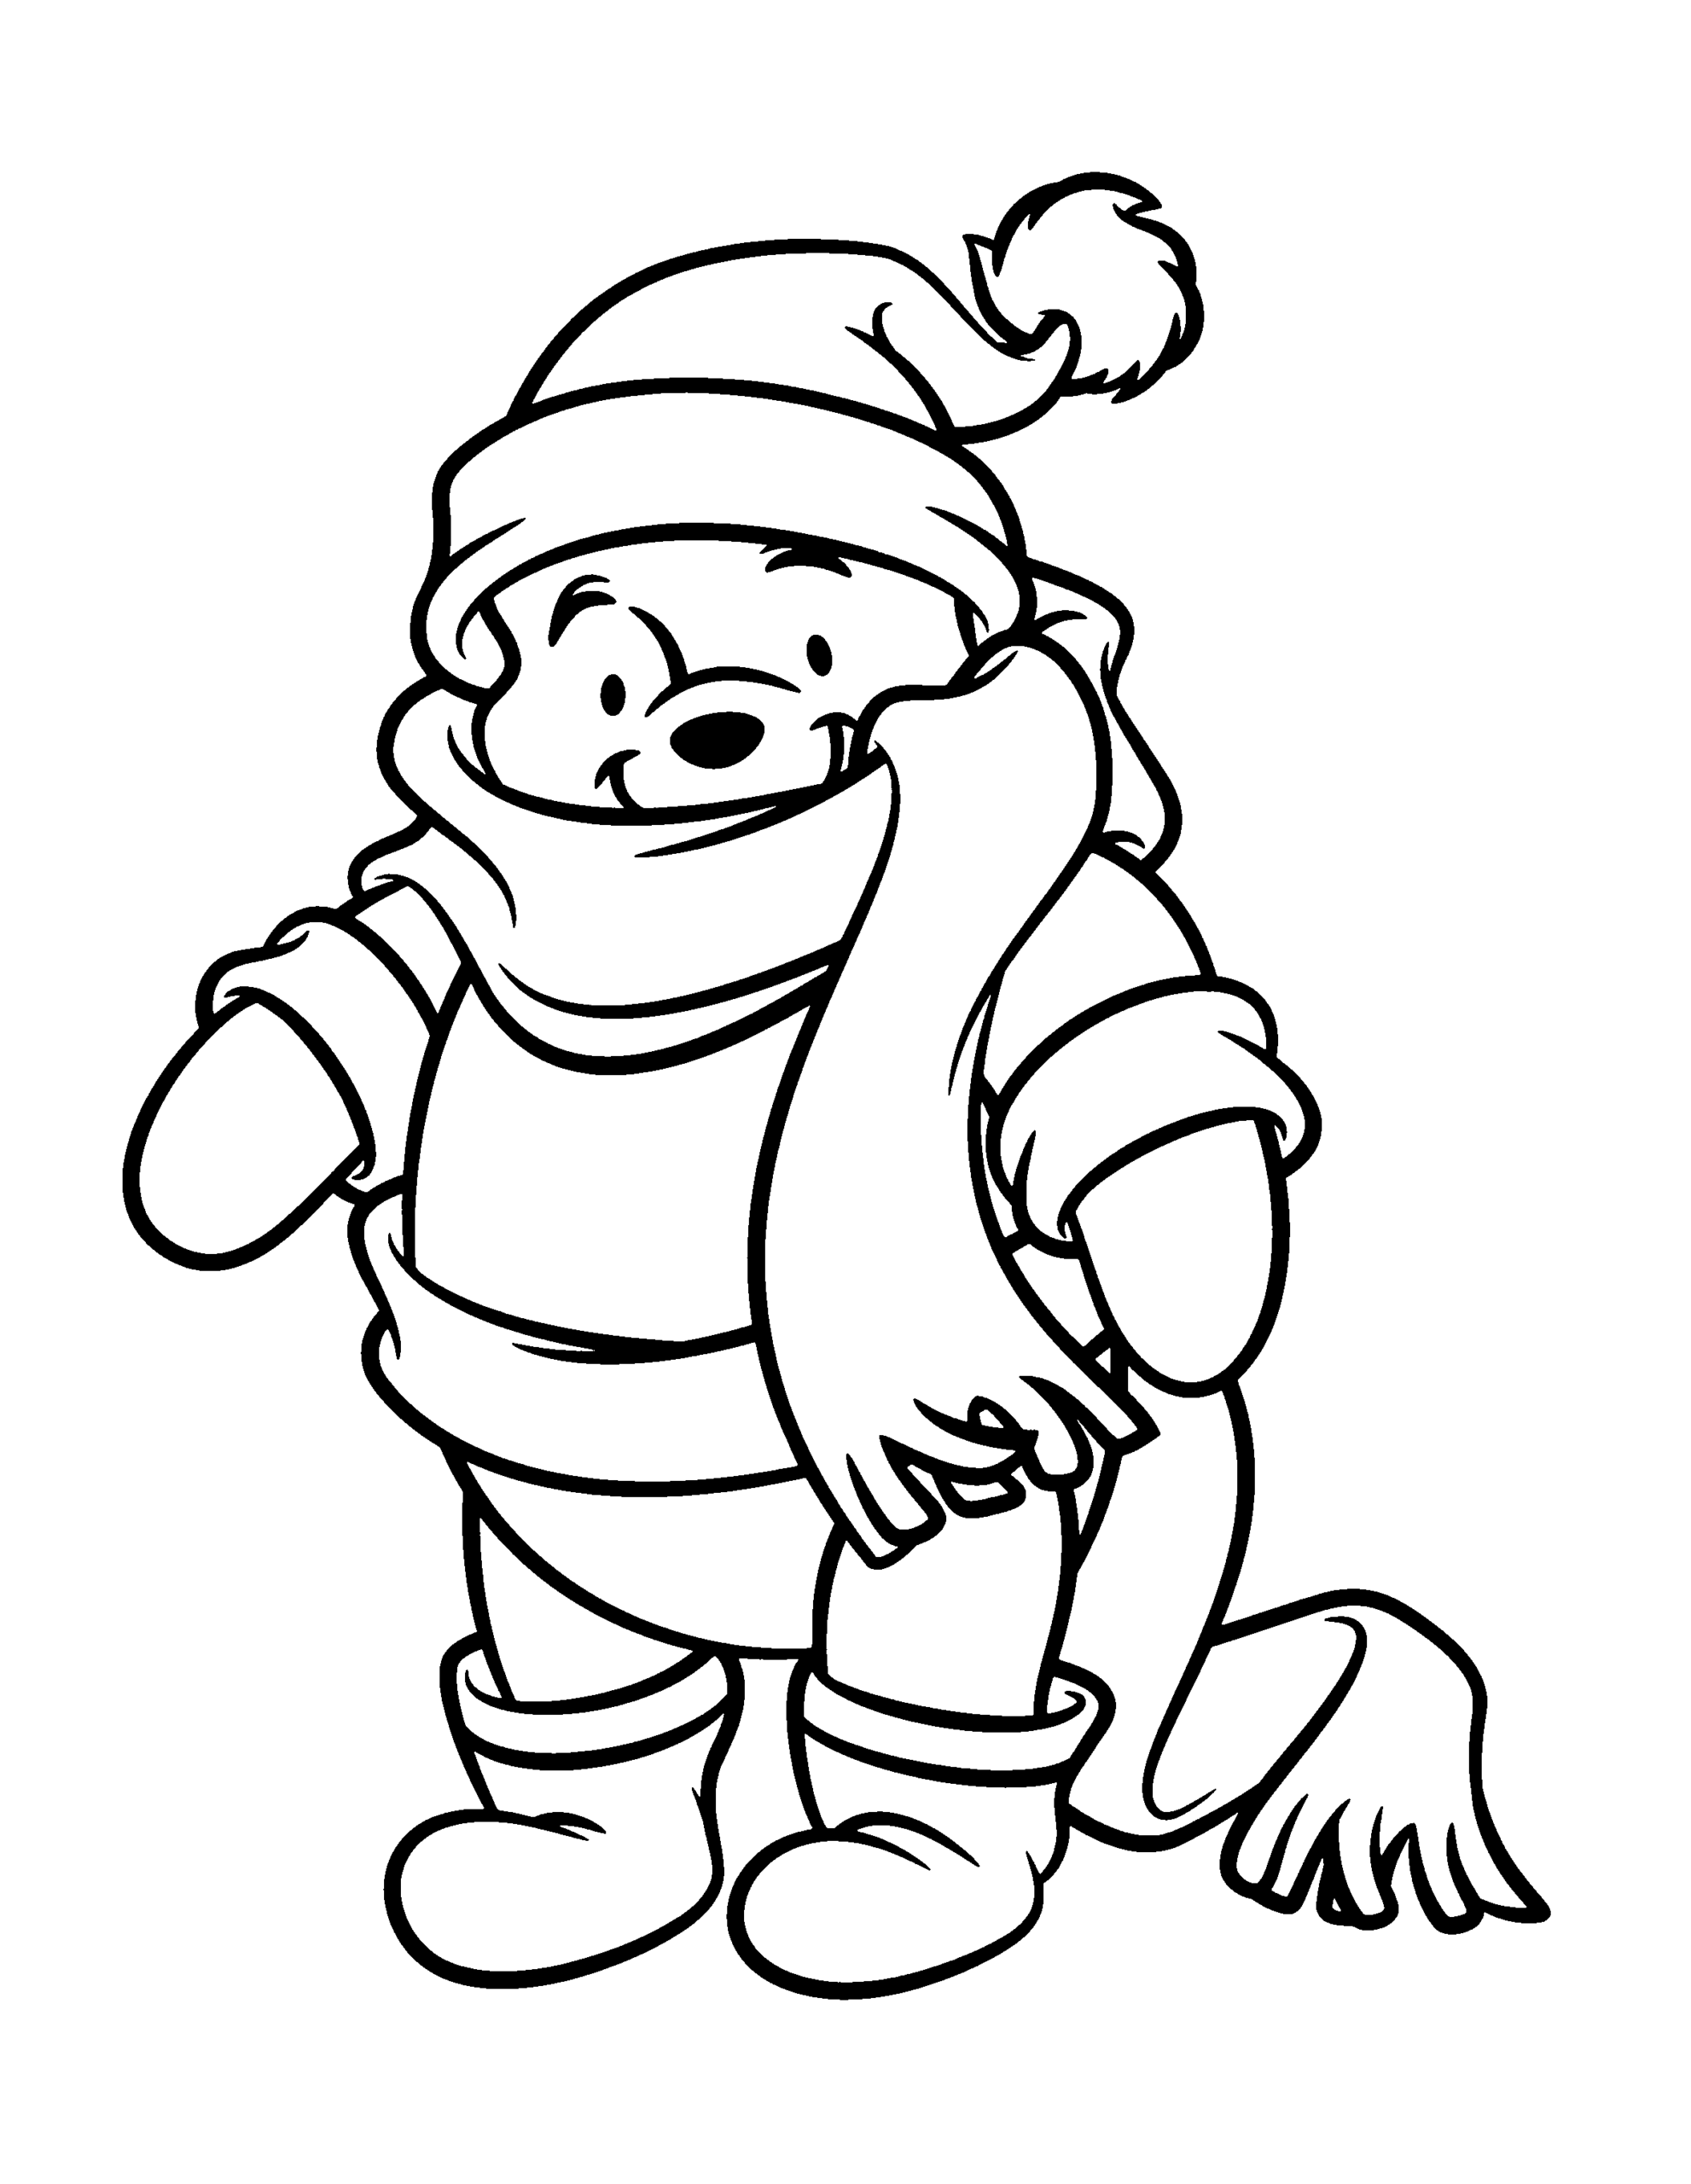 Winnie the Pooh Coloring Pages Cartoons Winnie The Pooh Printable 2020 7227 Coloring4free